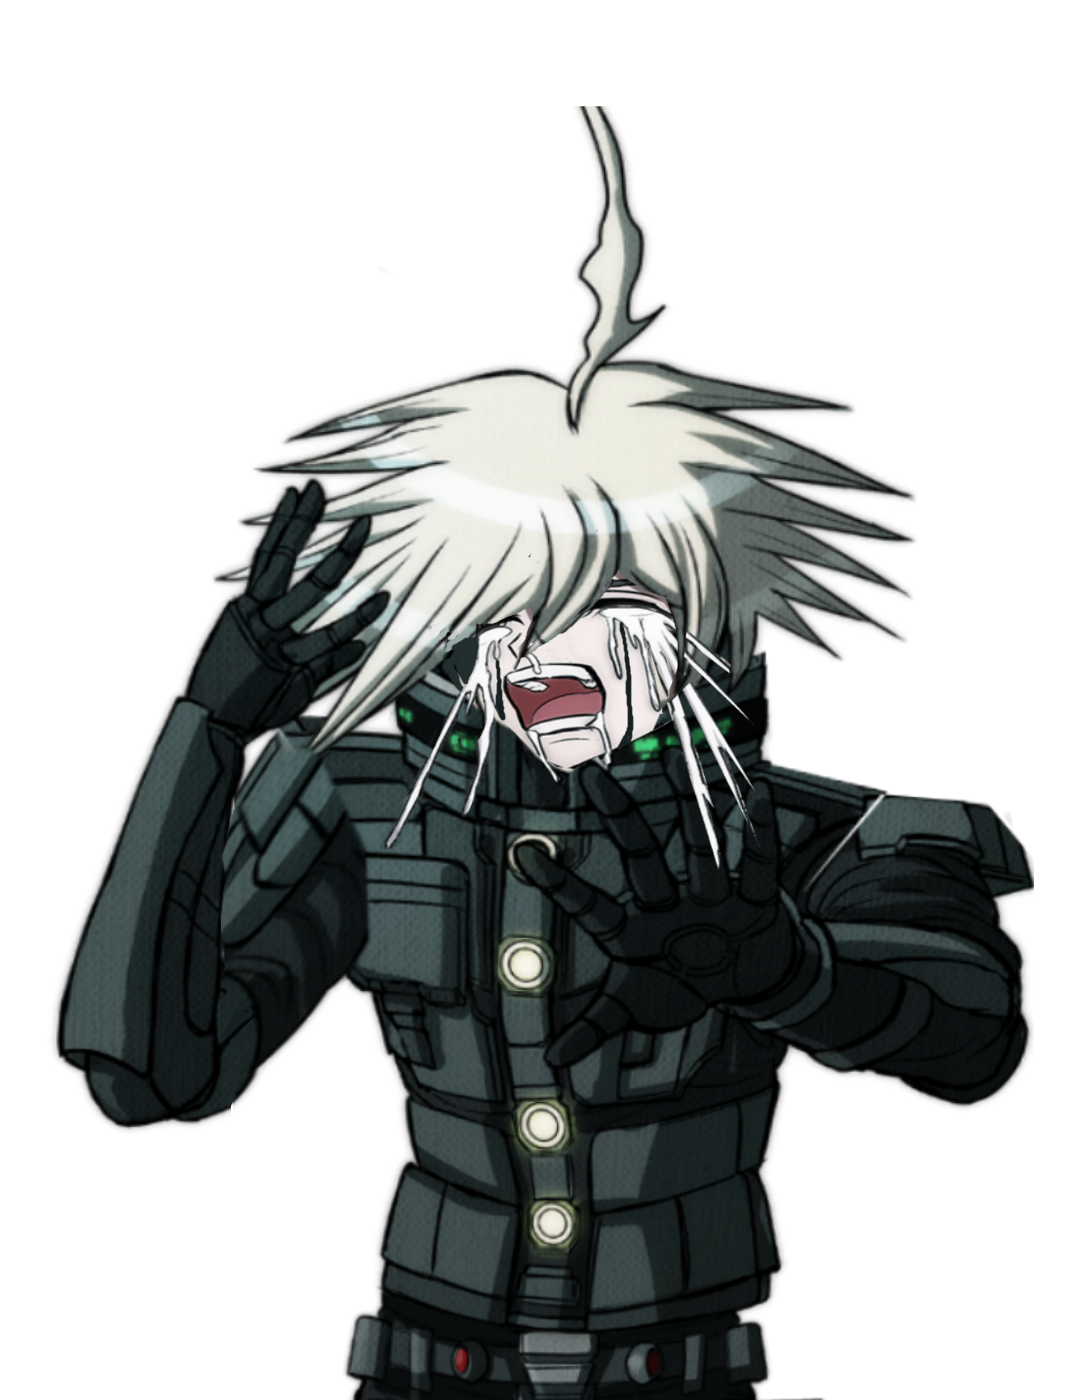 welcome to the shitshow of danganronpa edits, Hi heres something cursed